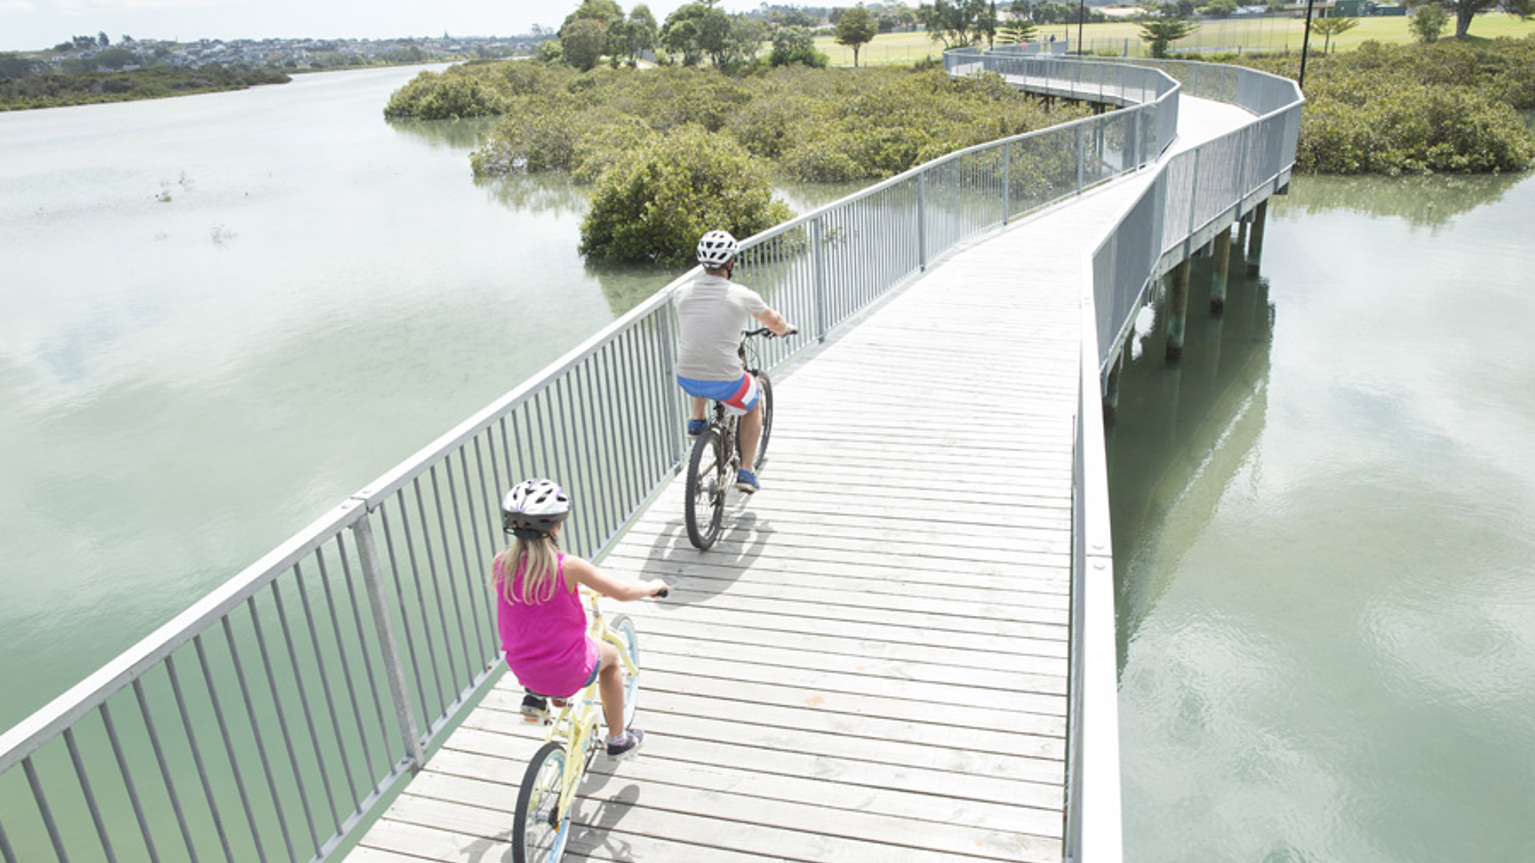 A father and daughter ride bikes across a bridge over calm, green water to a nearby park.